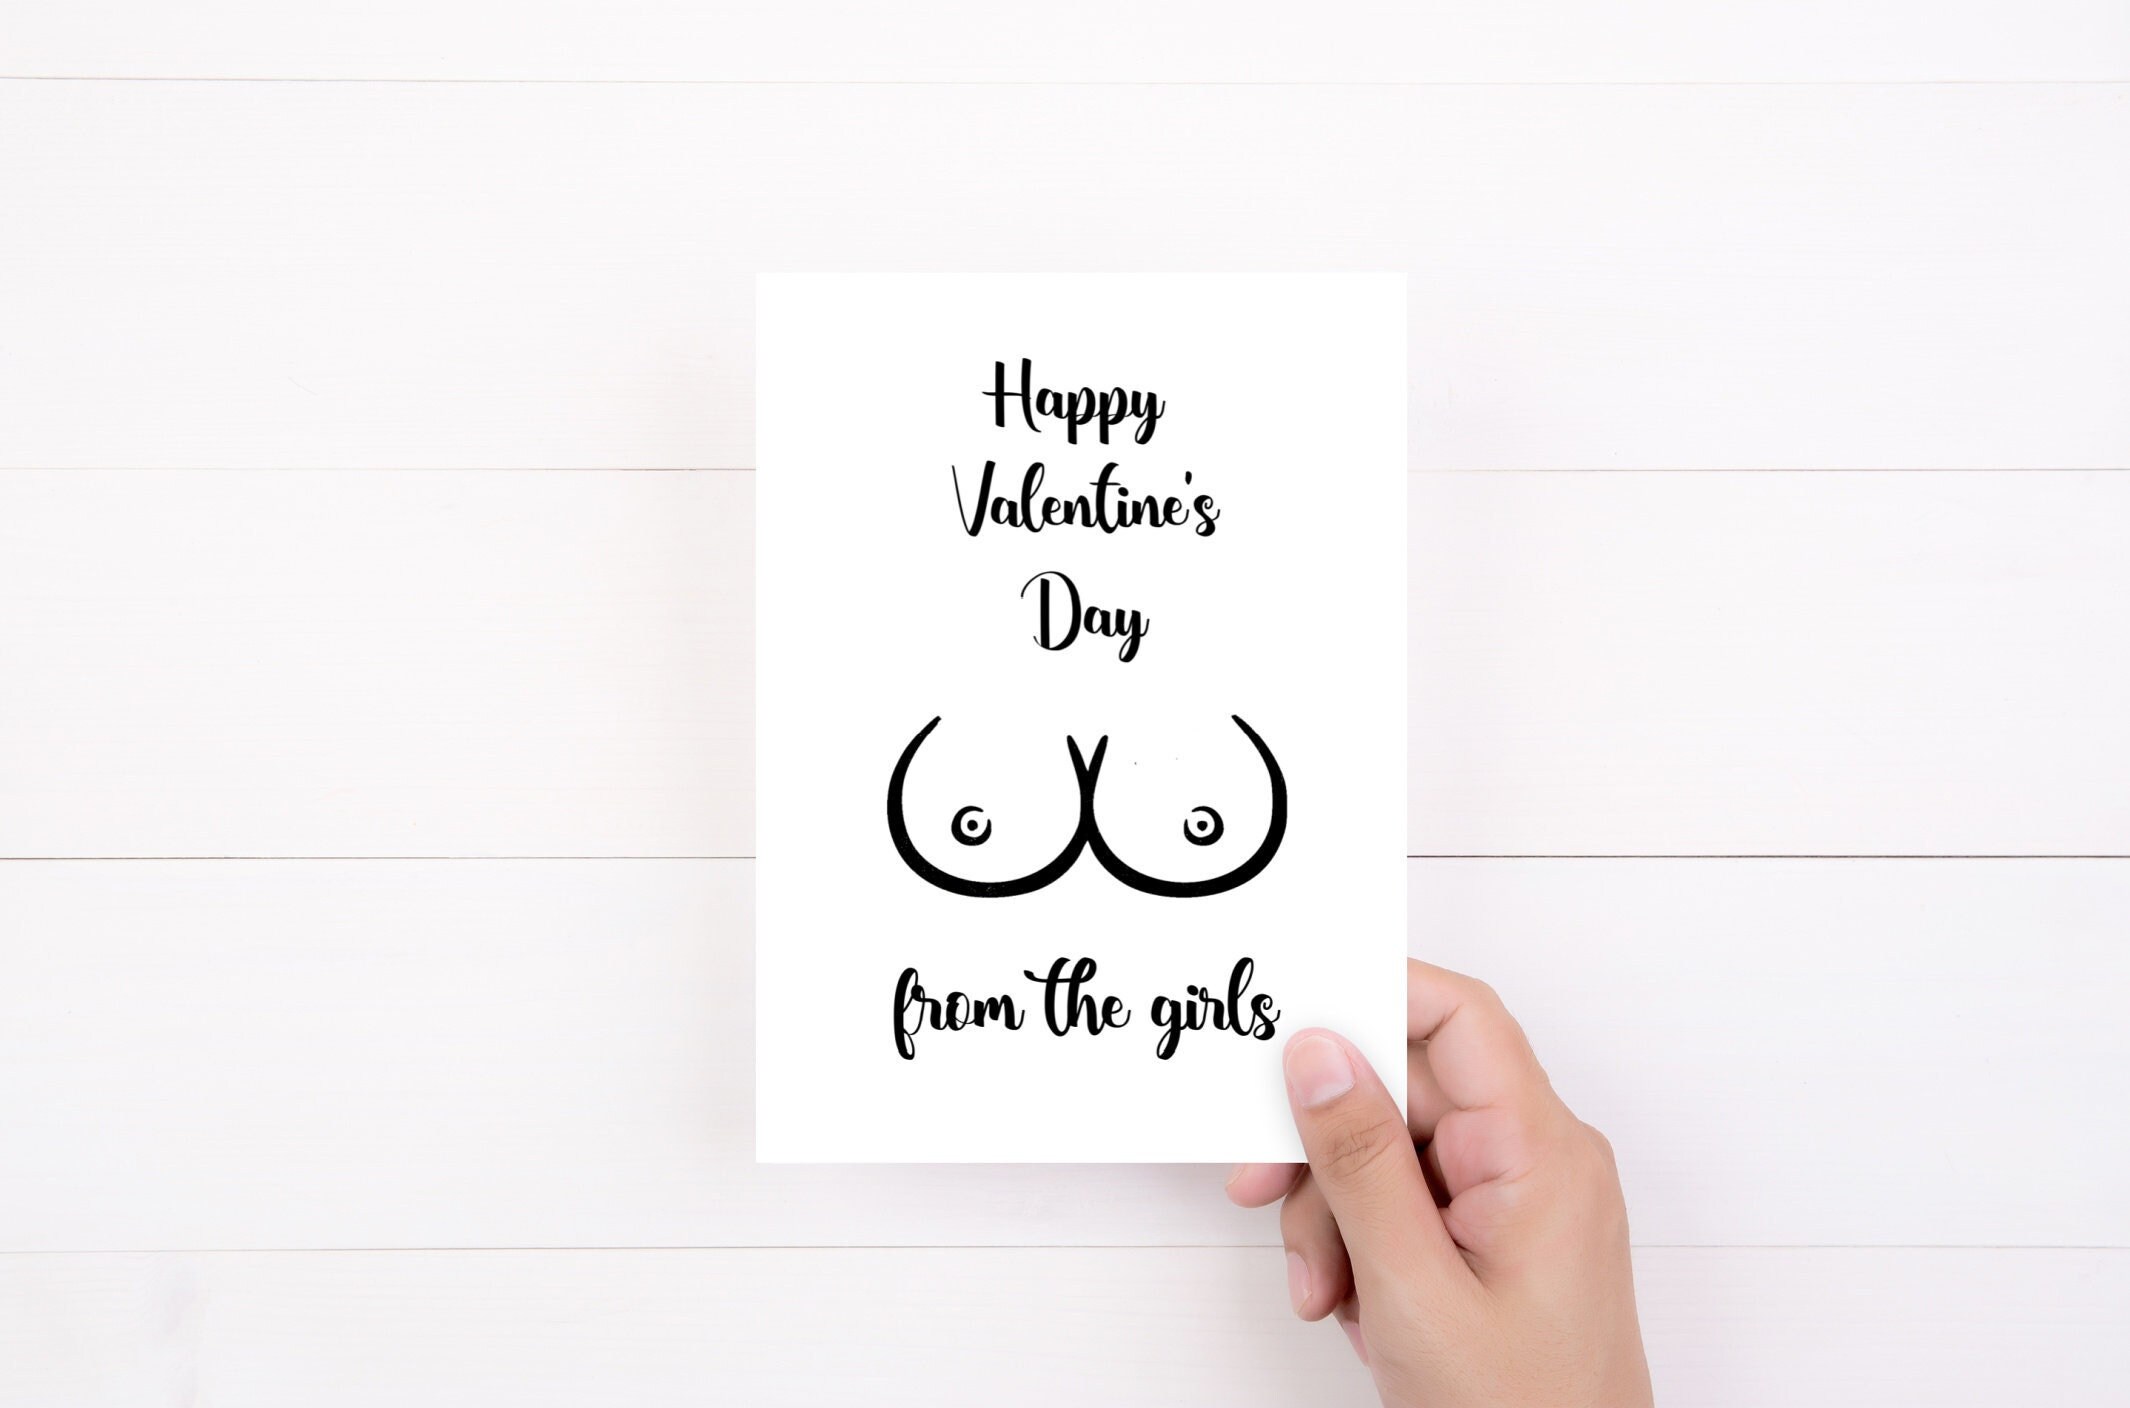 Happy Valentine's Day Big Tits Rude Funny Offensive Novelty